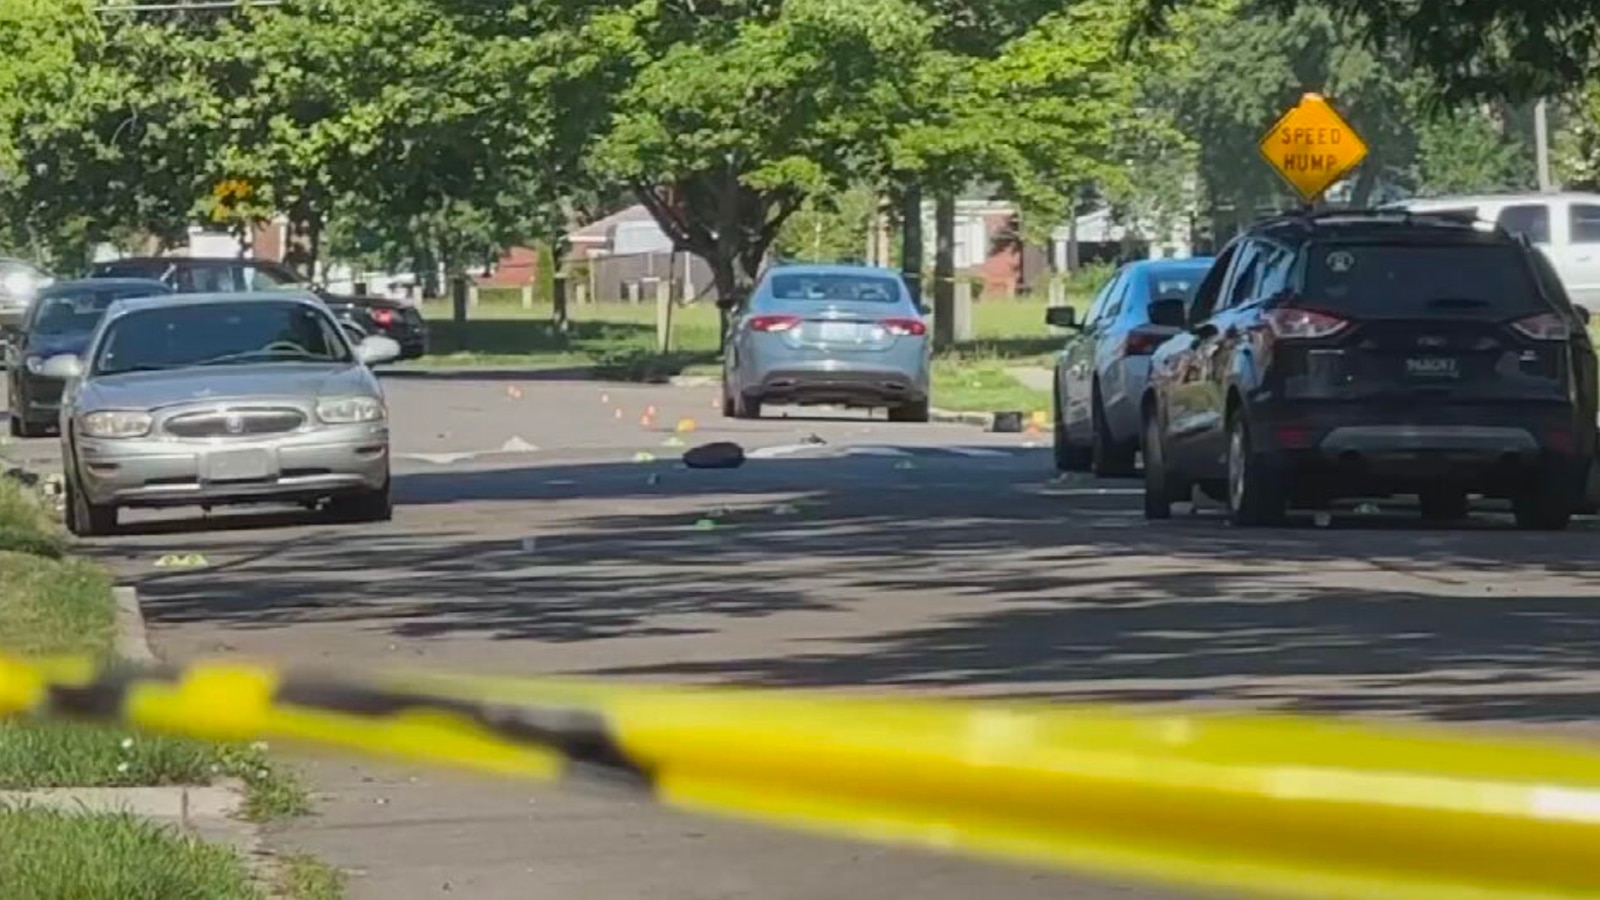 2 killed, 19 injured in Detroit block party shooting: Police